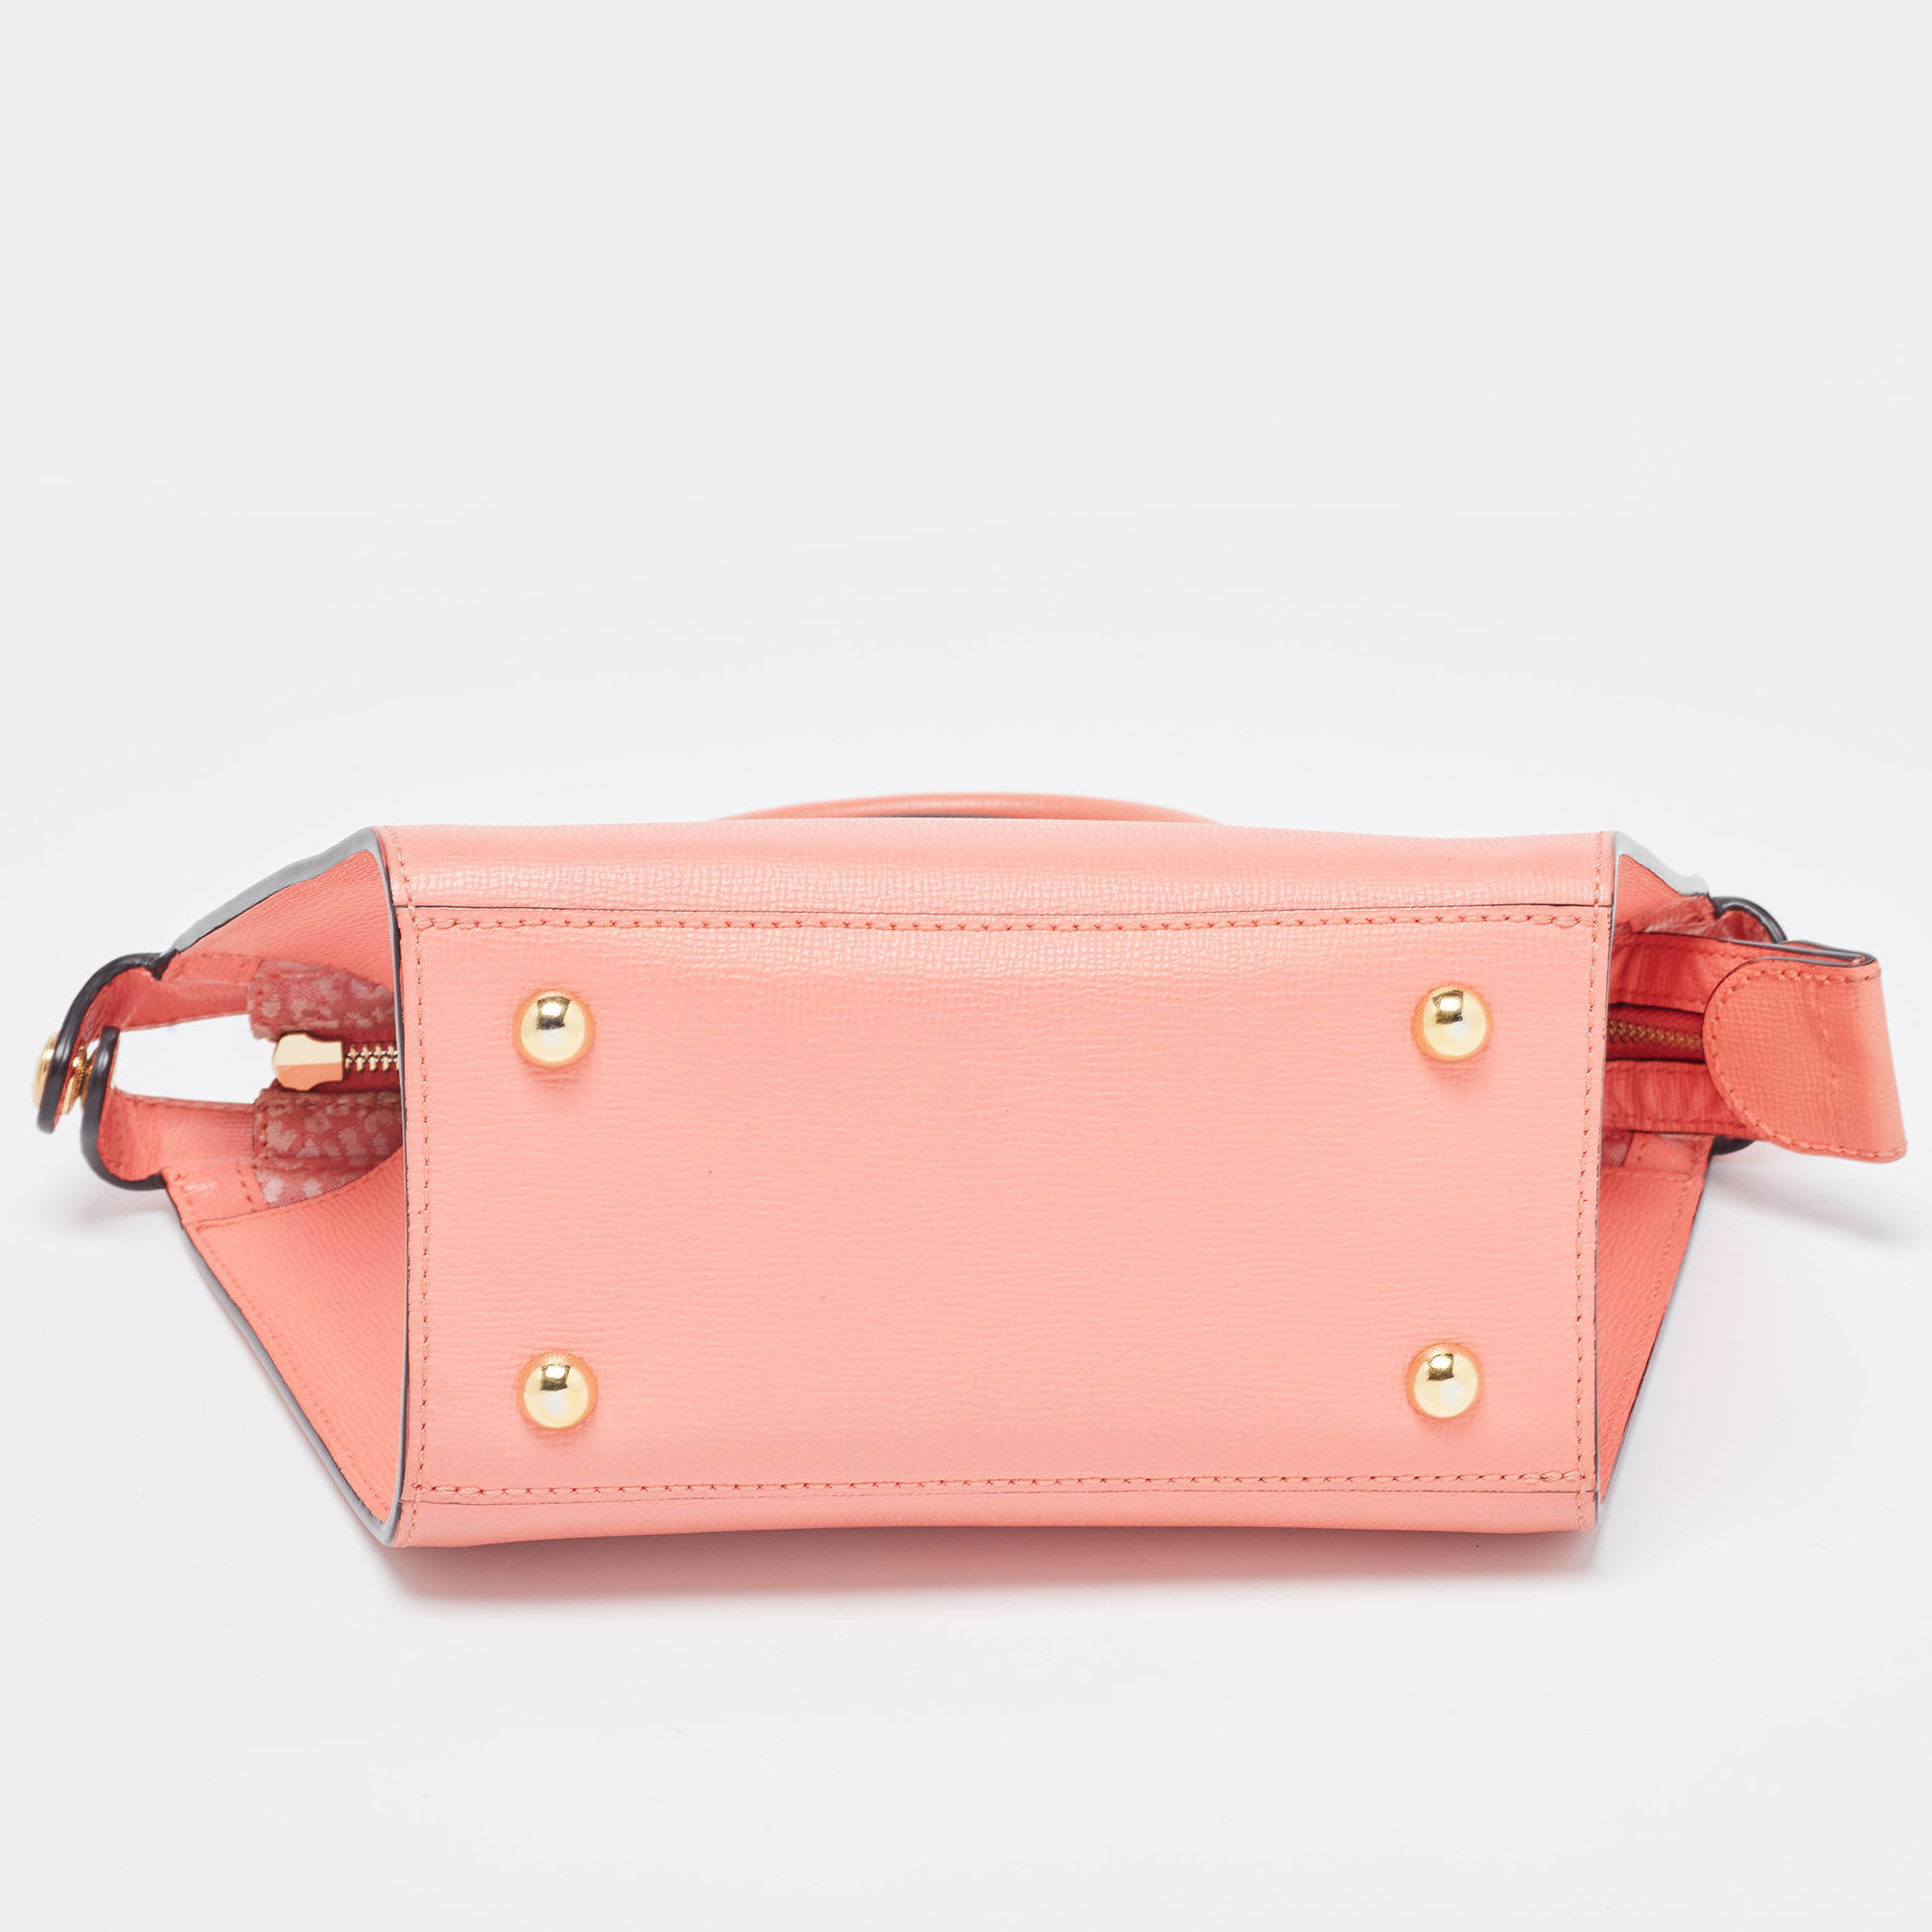 Longchamp Coral Leather Small Le Pliage Heritage Tote